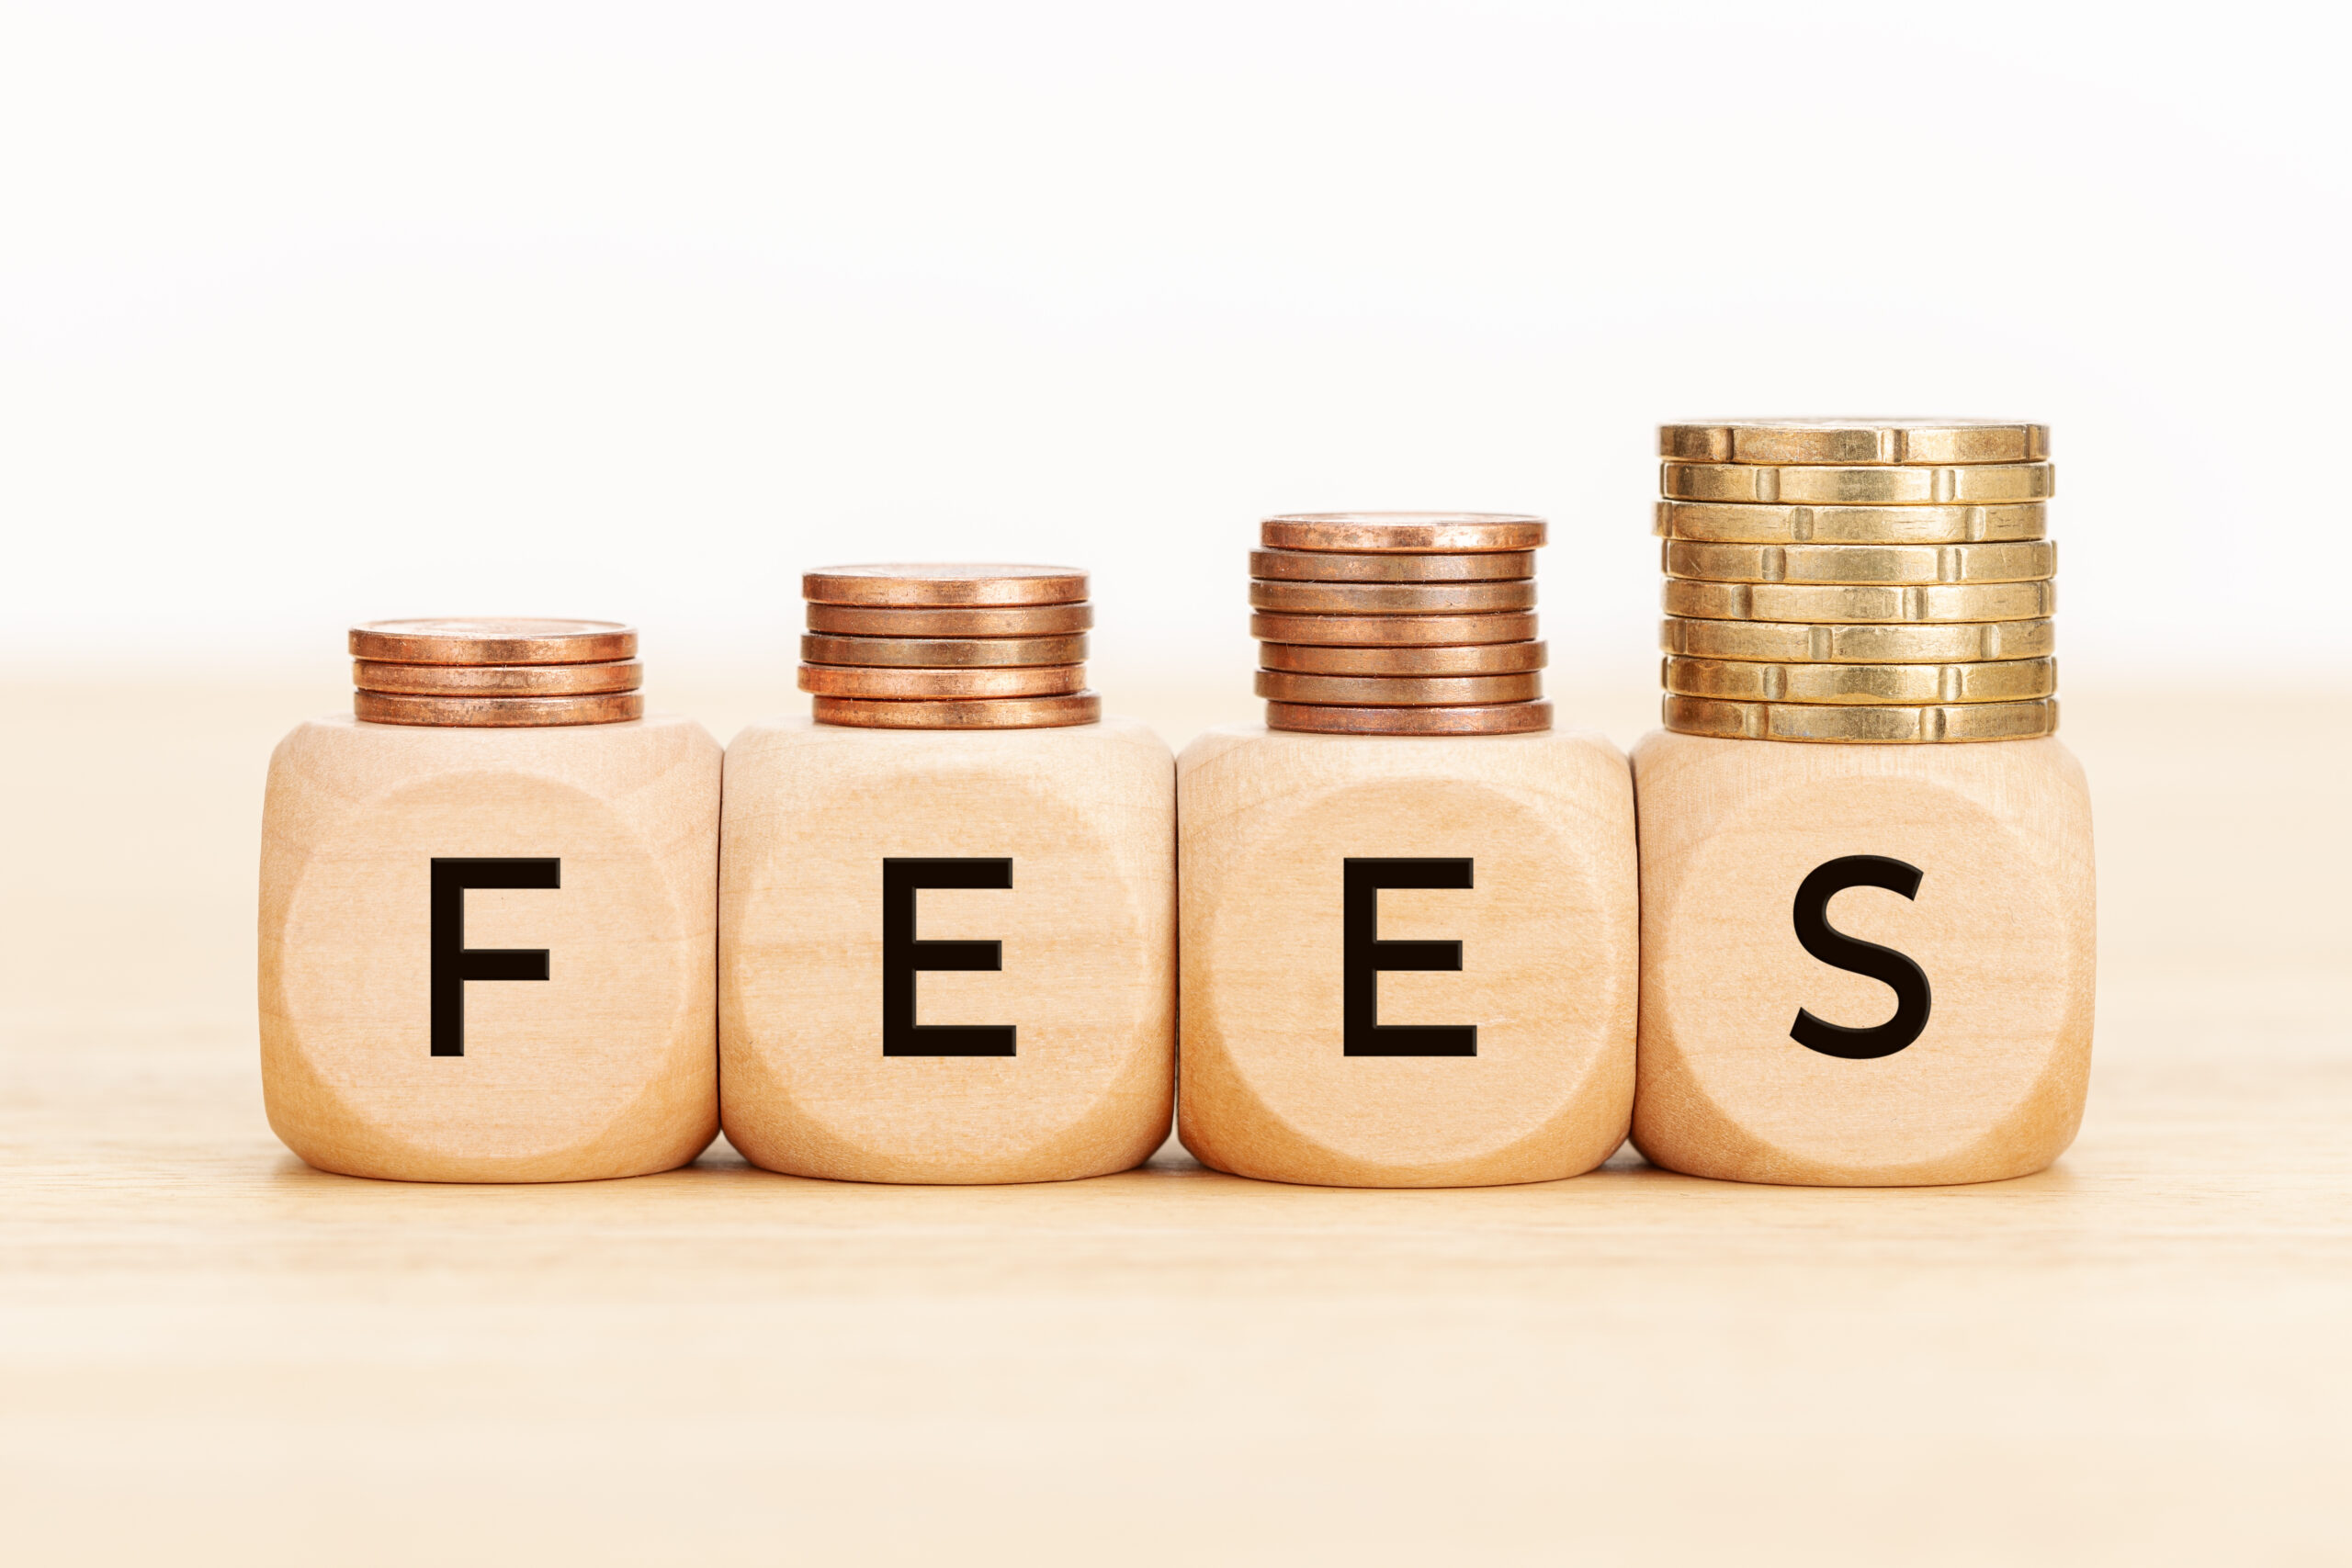 pay supervision fees